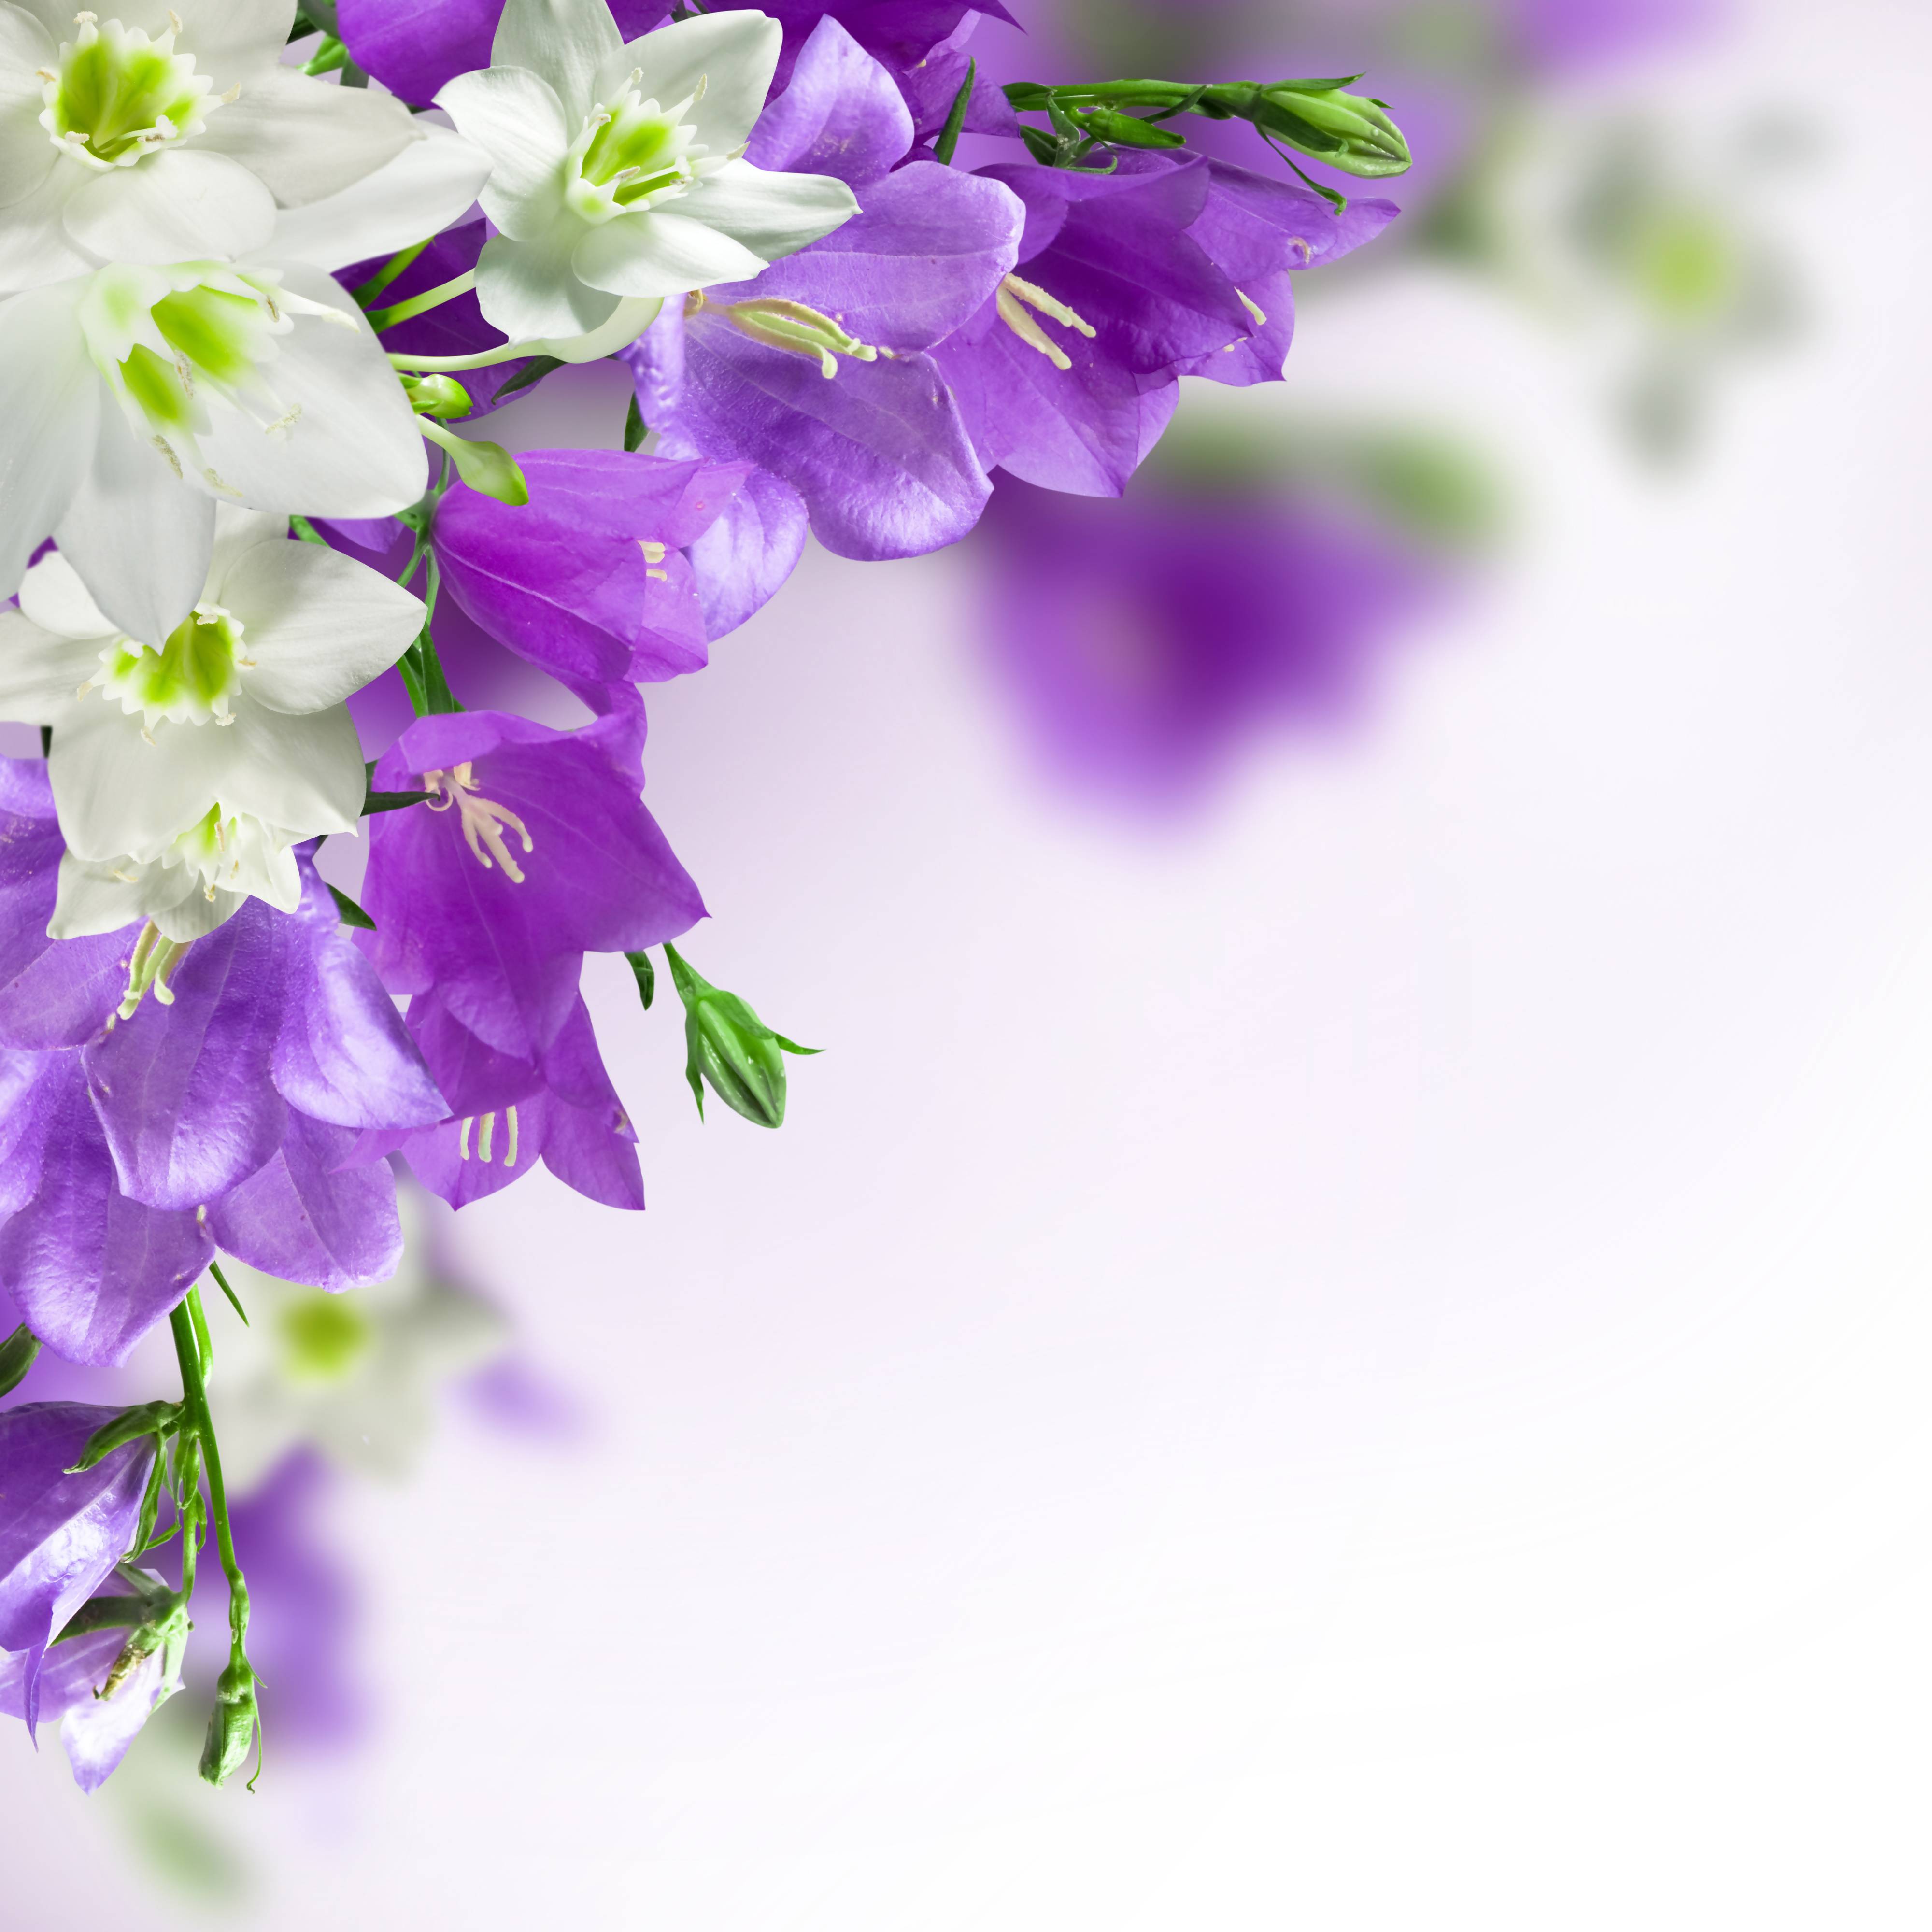 Spring Backgrounds with White and Purple Flowers